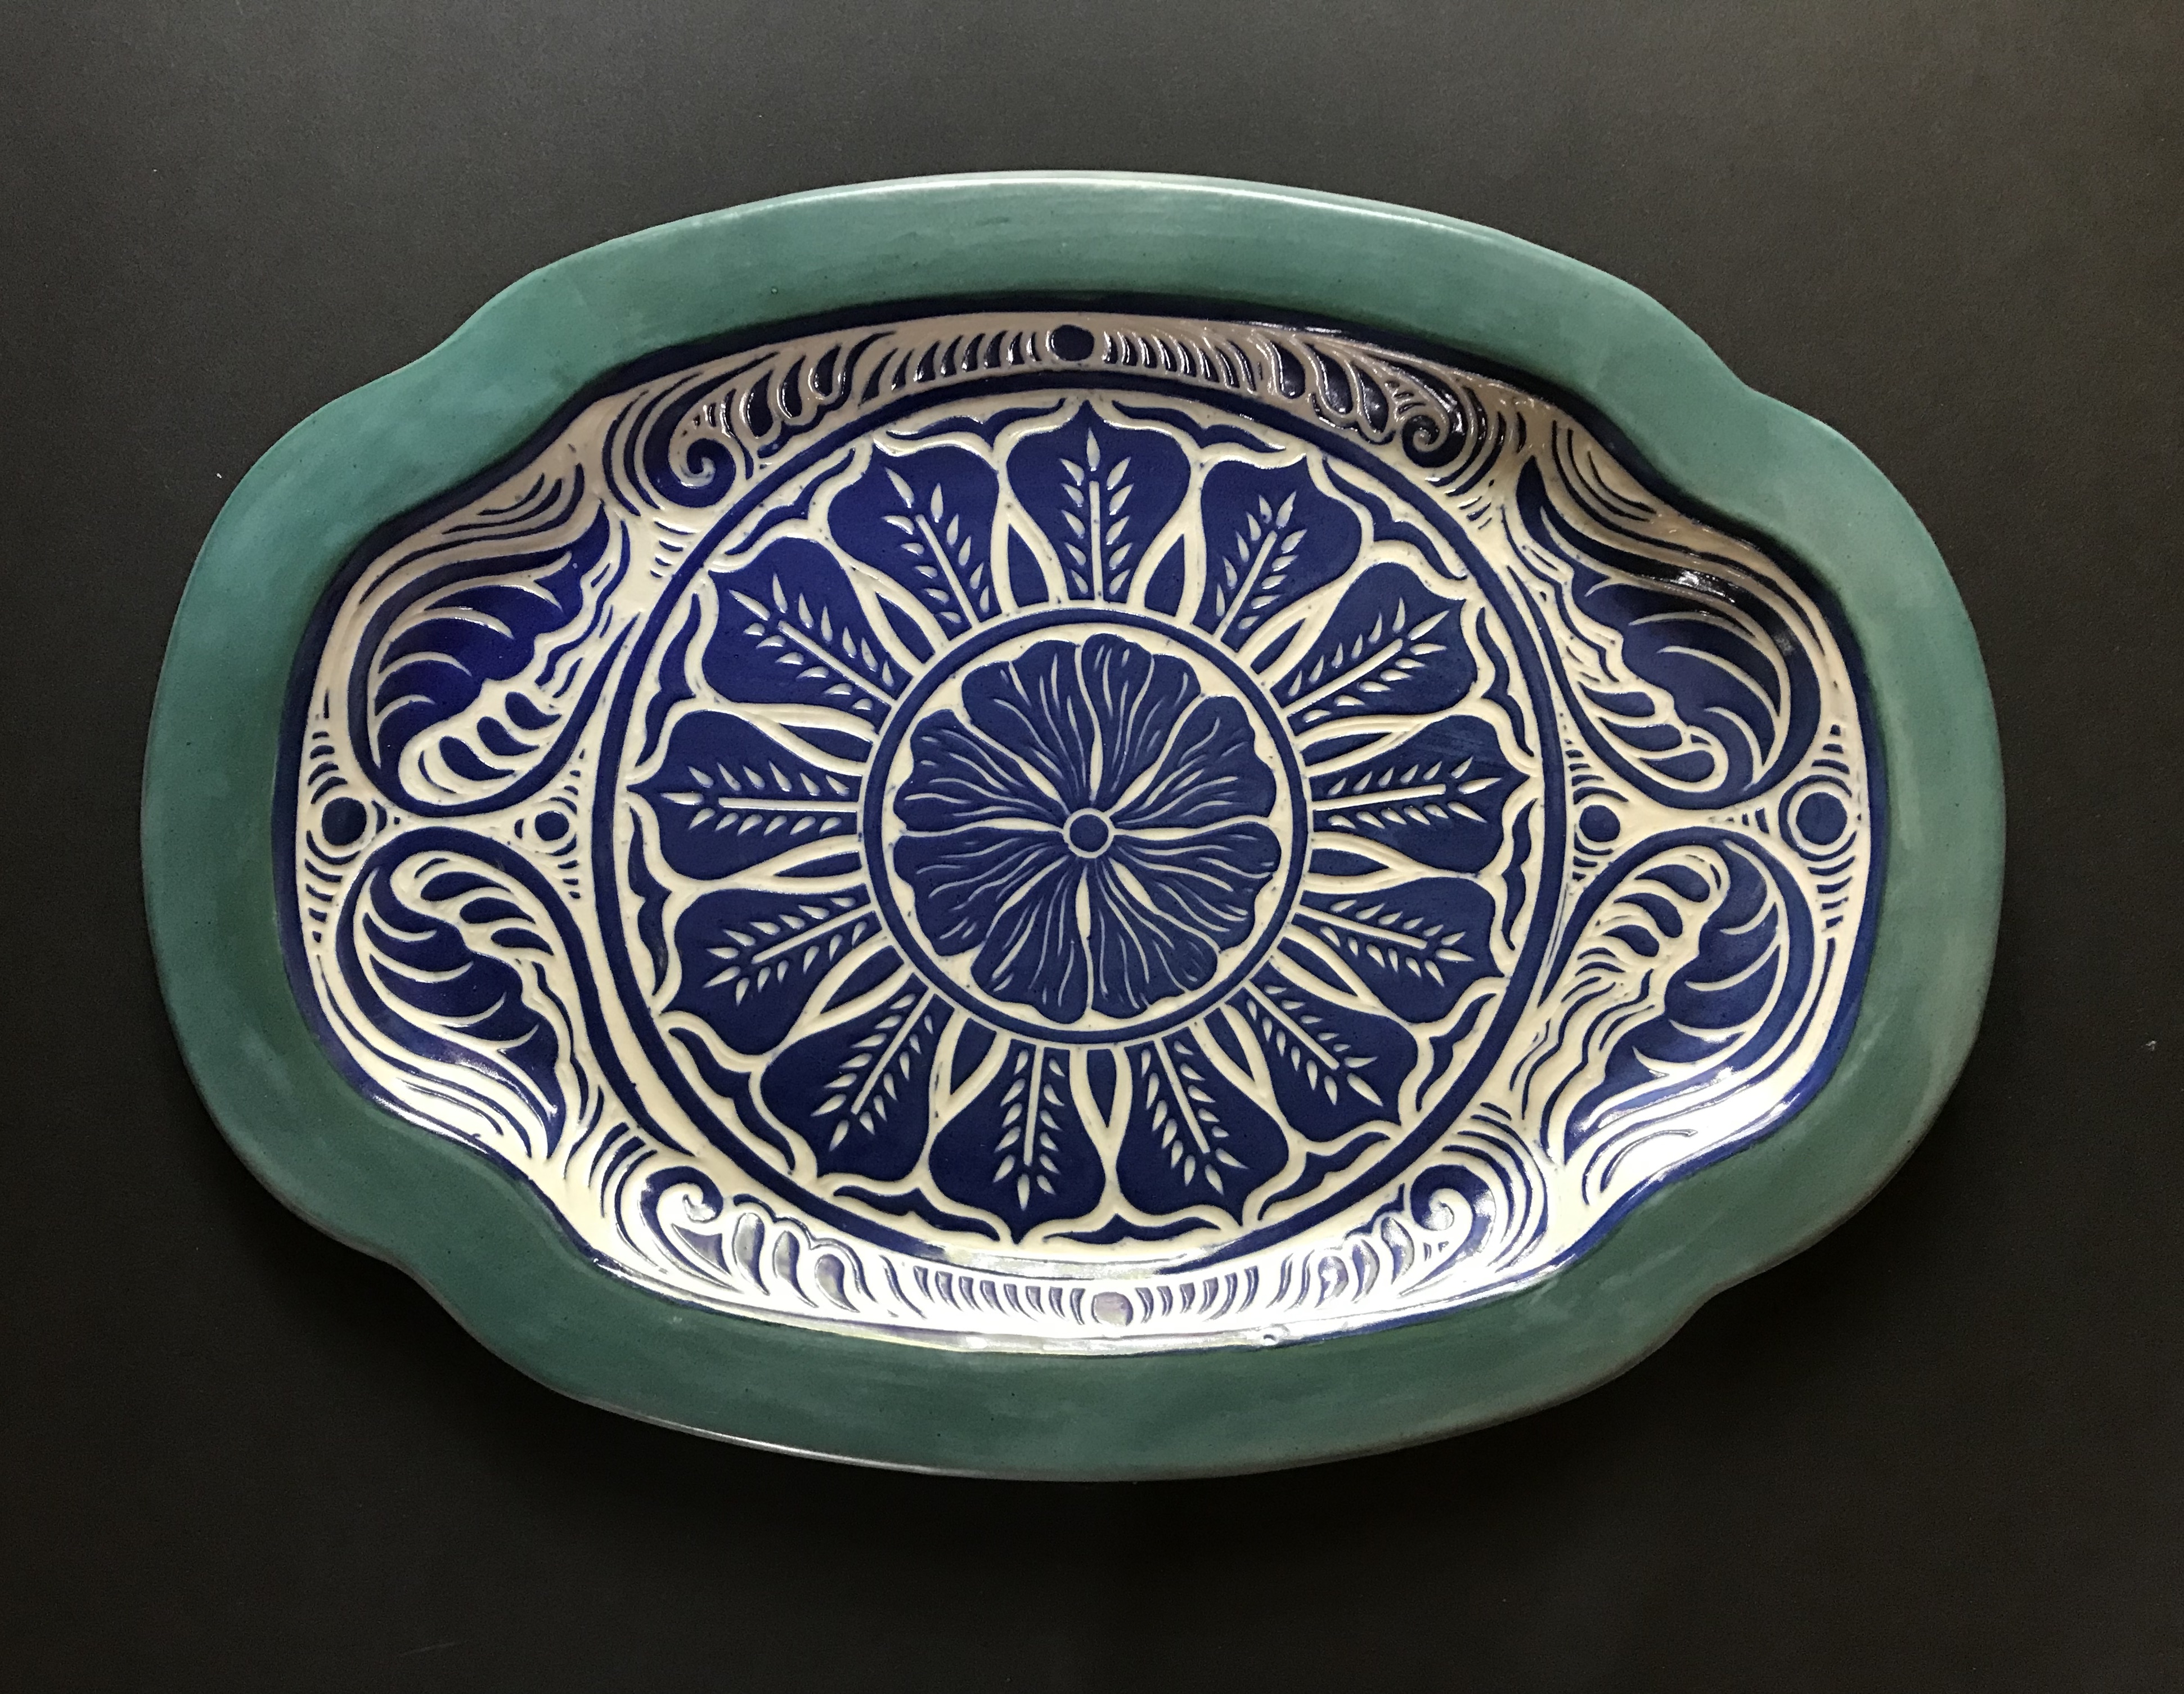 Large Serving Platter In Blue and Turquoise with Sgrafitto Carved Mandala Desgin